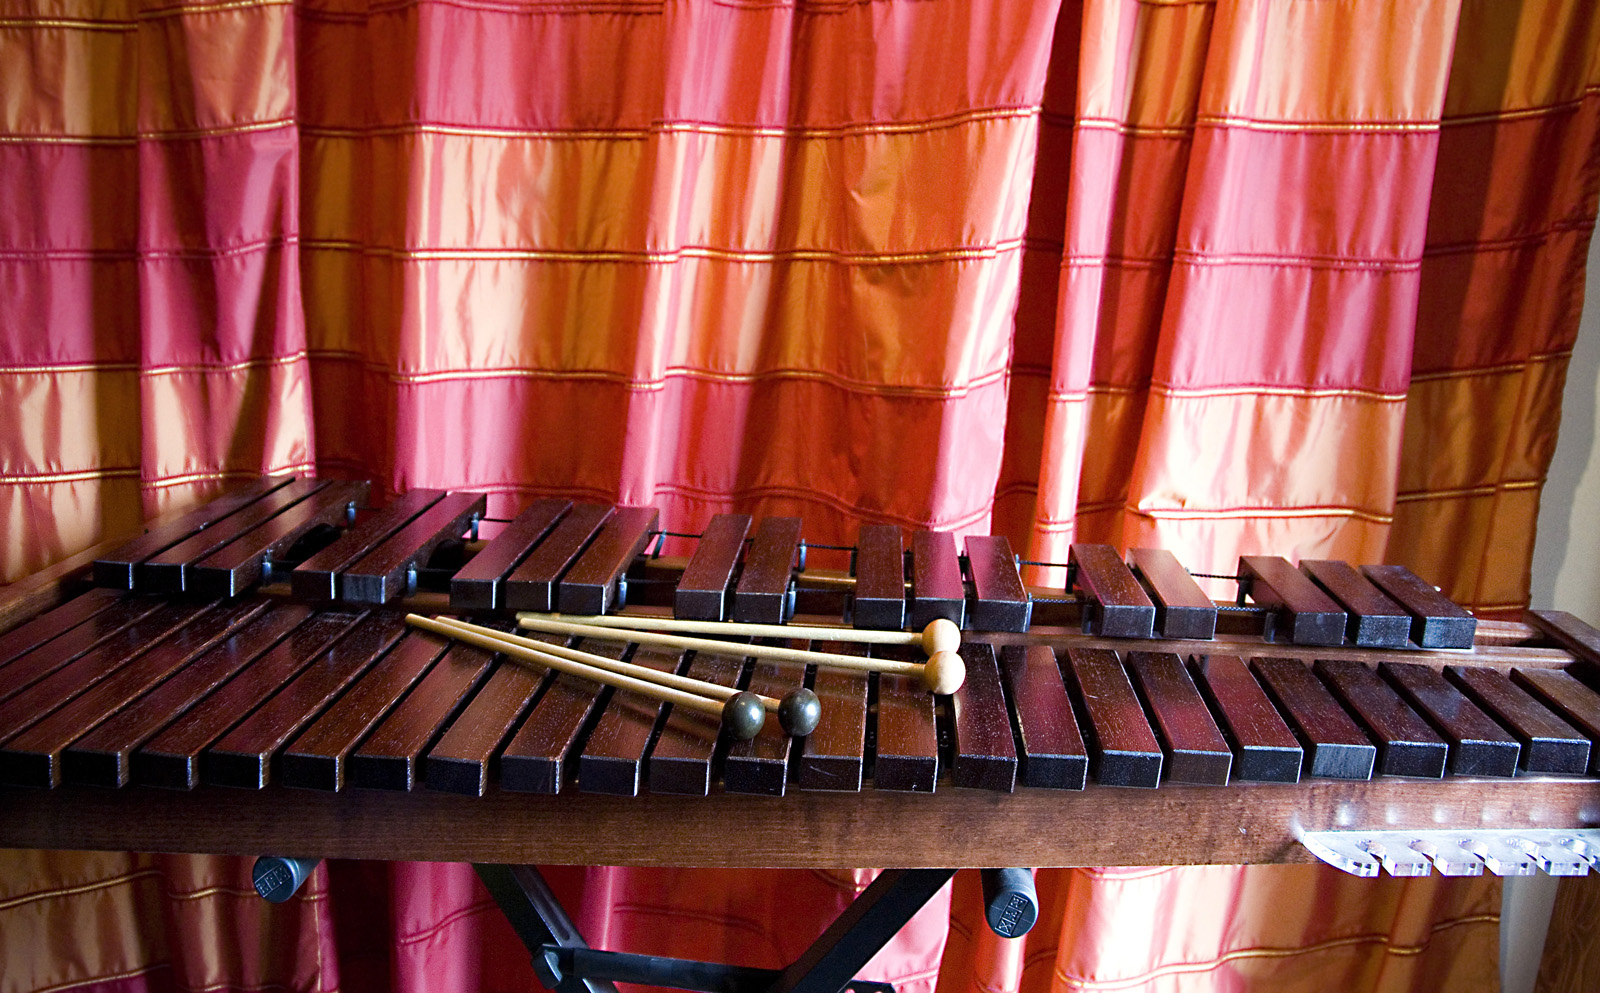 what is a marimba and where did the marimba come from